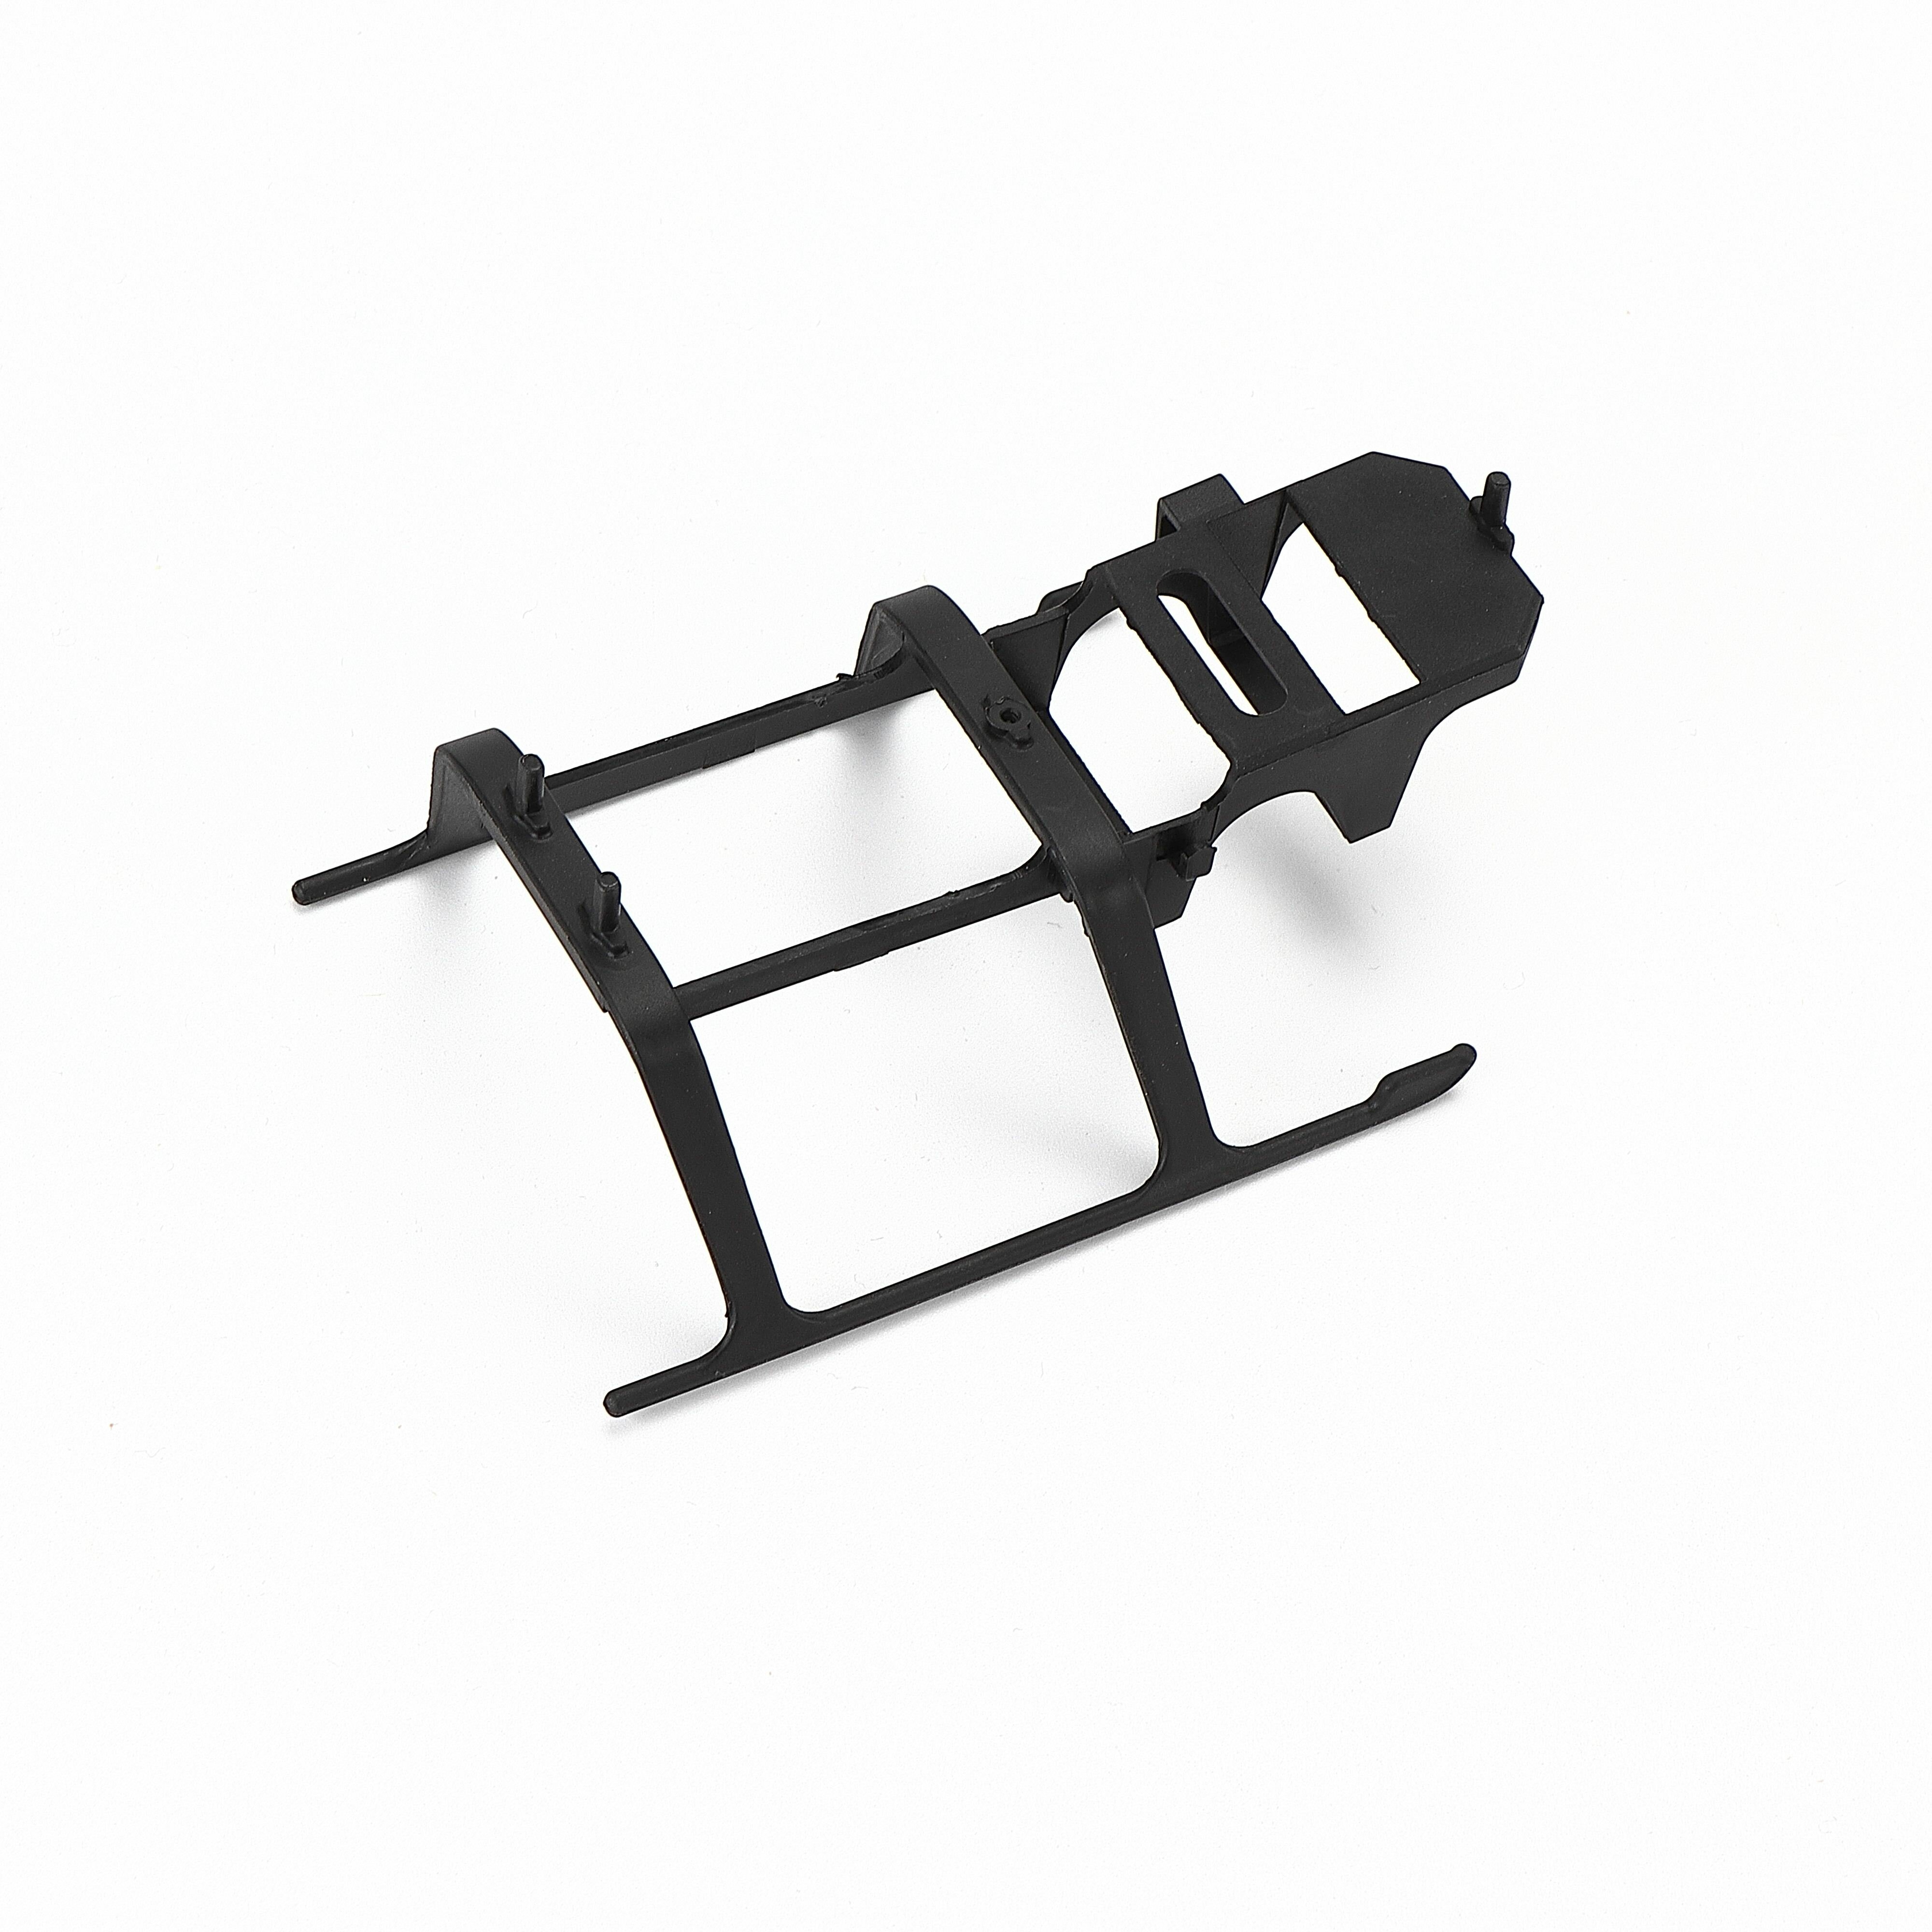 Eachine E130 RC Helicopter Spare Parts Landing Skid